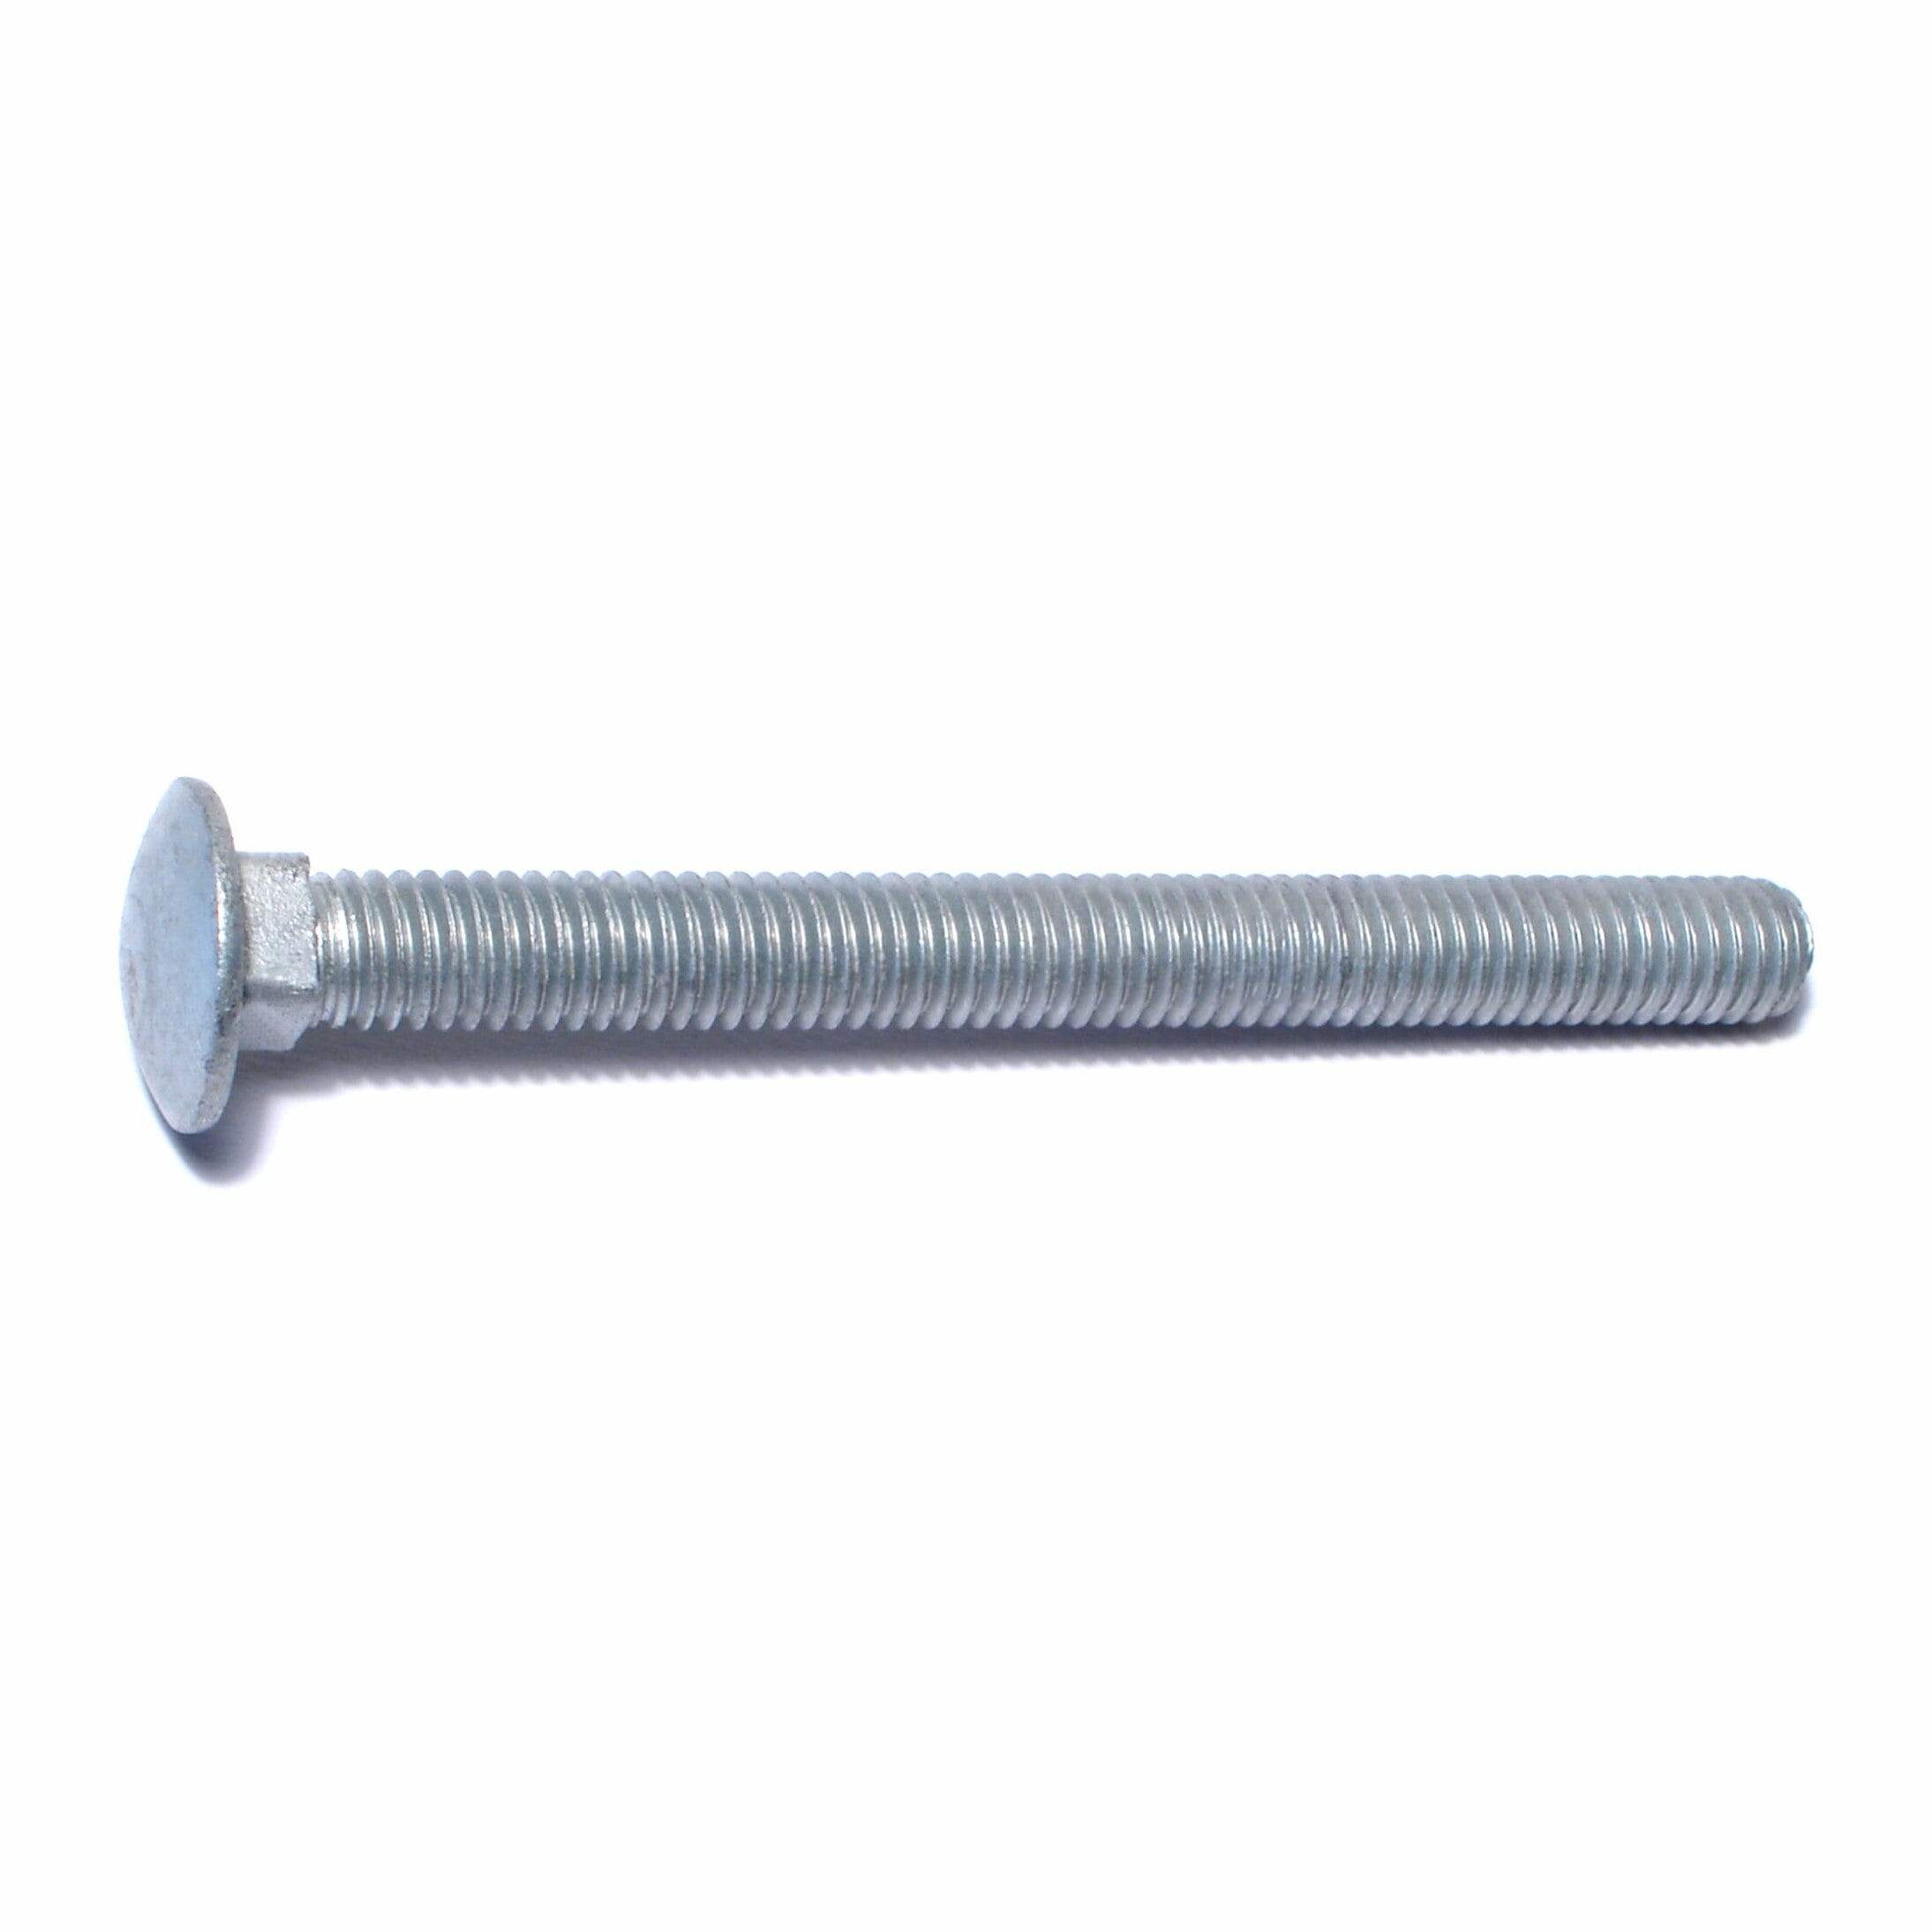 Fasteners, Bolts,3/8″-16 x 4″, Carriage Bolts